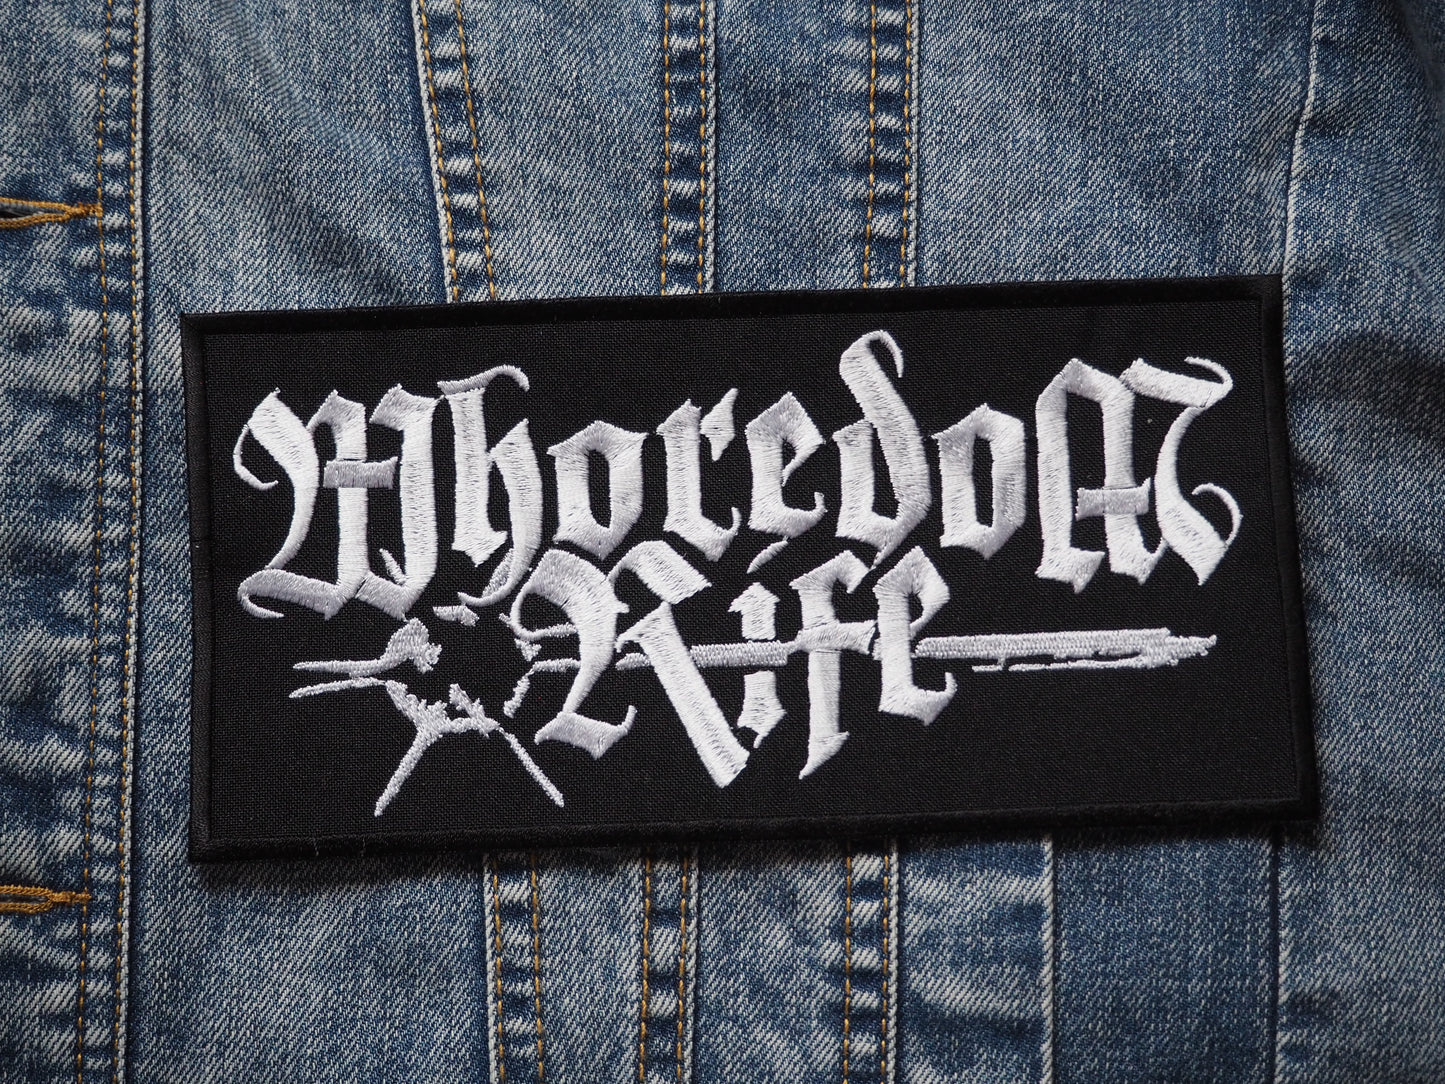 Whoredom Rife Black Metal Embroidered Patch